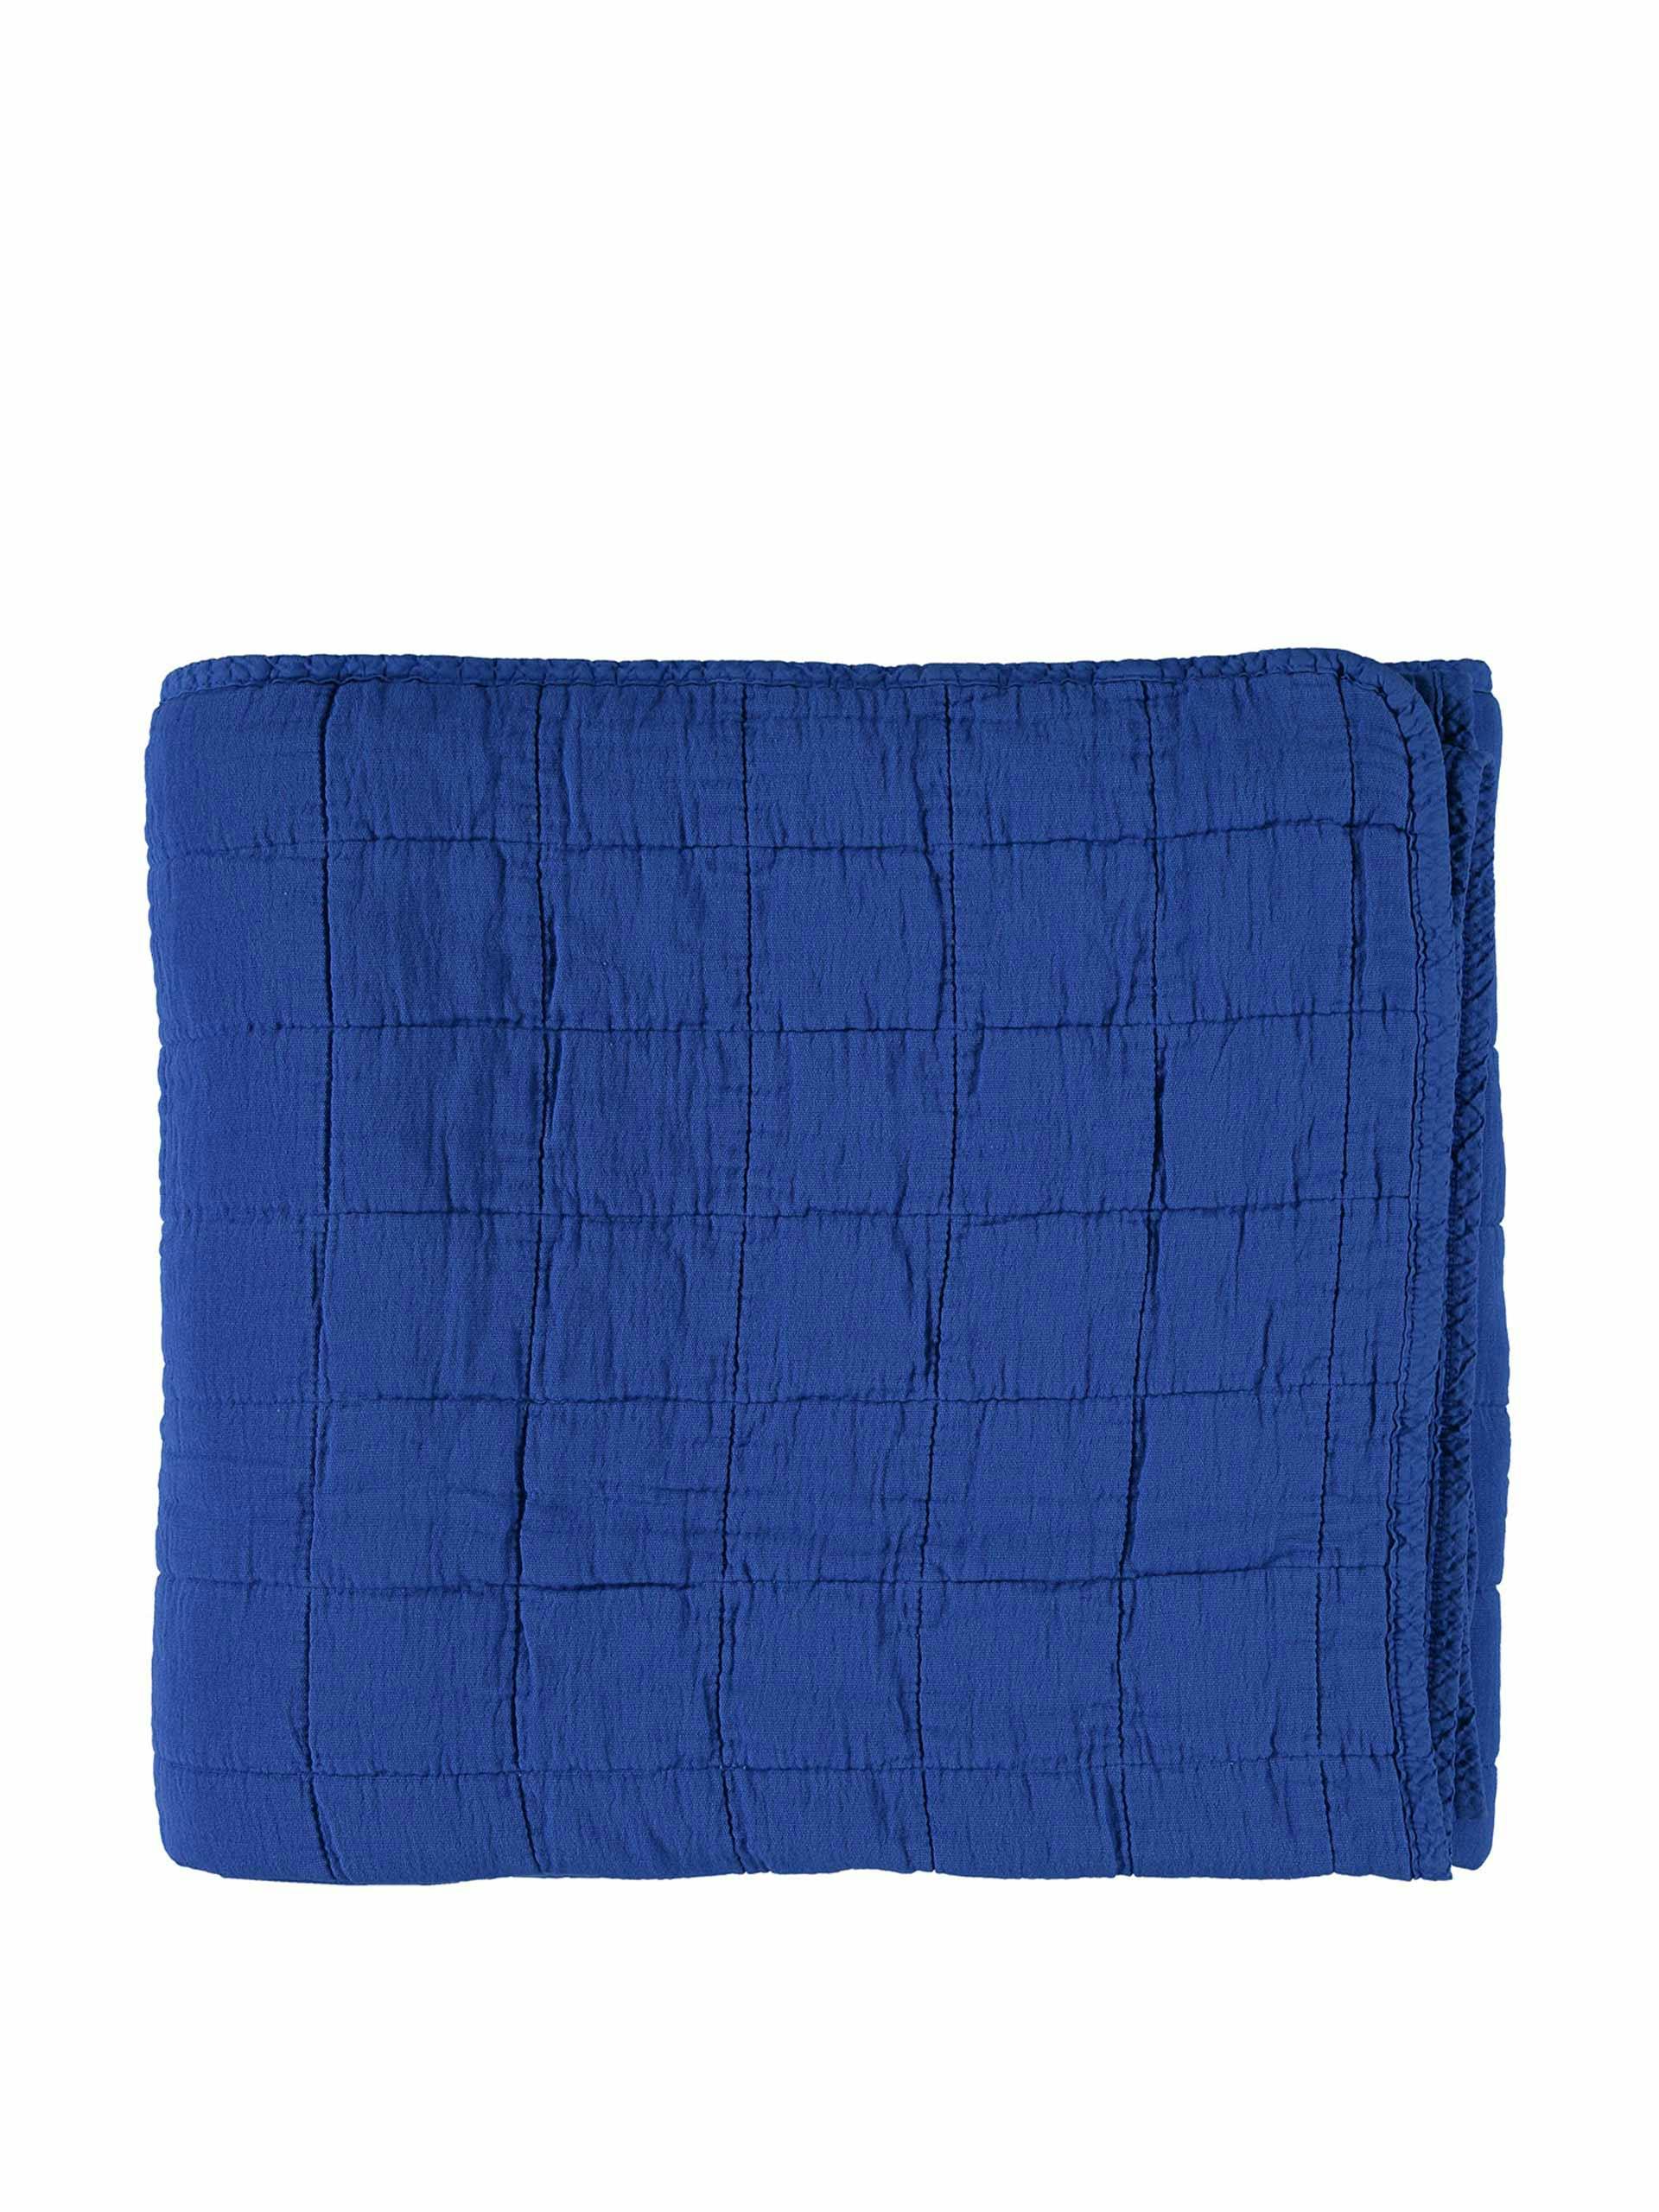 Square quilted gauze blanket